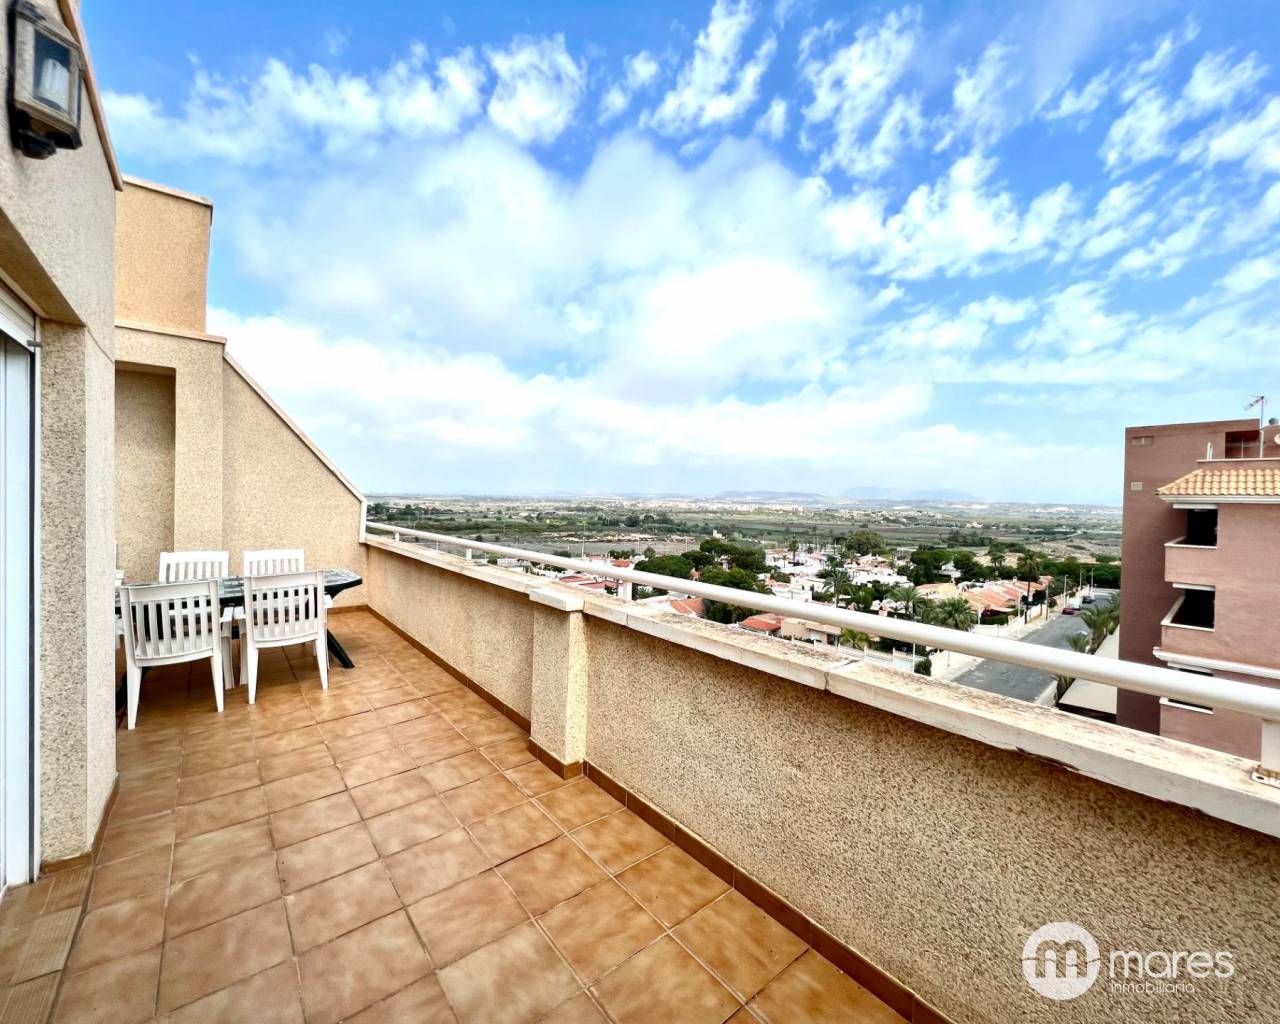 Penthouse - Sale - Arenales del sol - Zona paseo maritimo